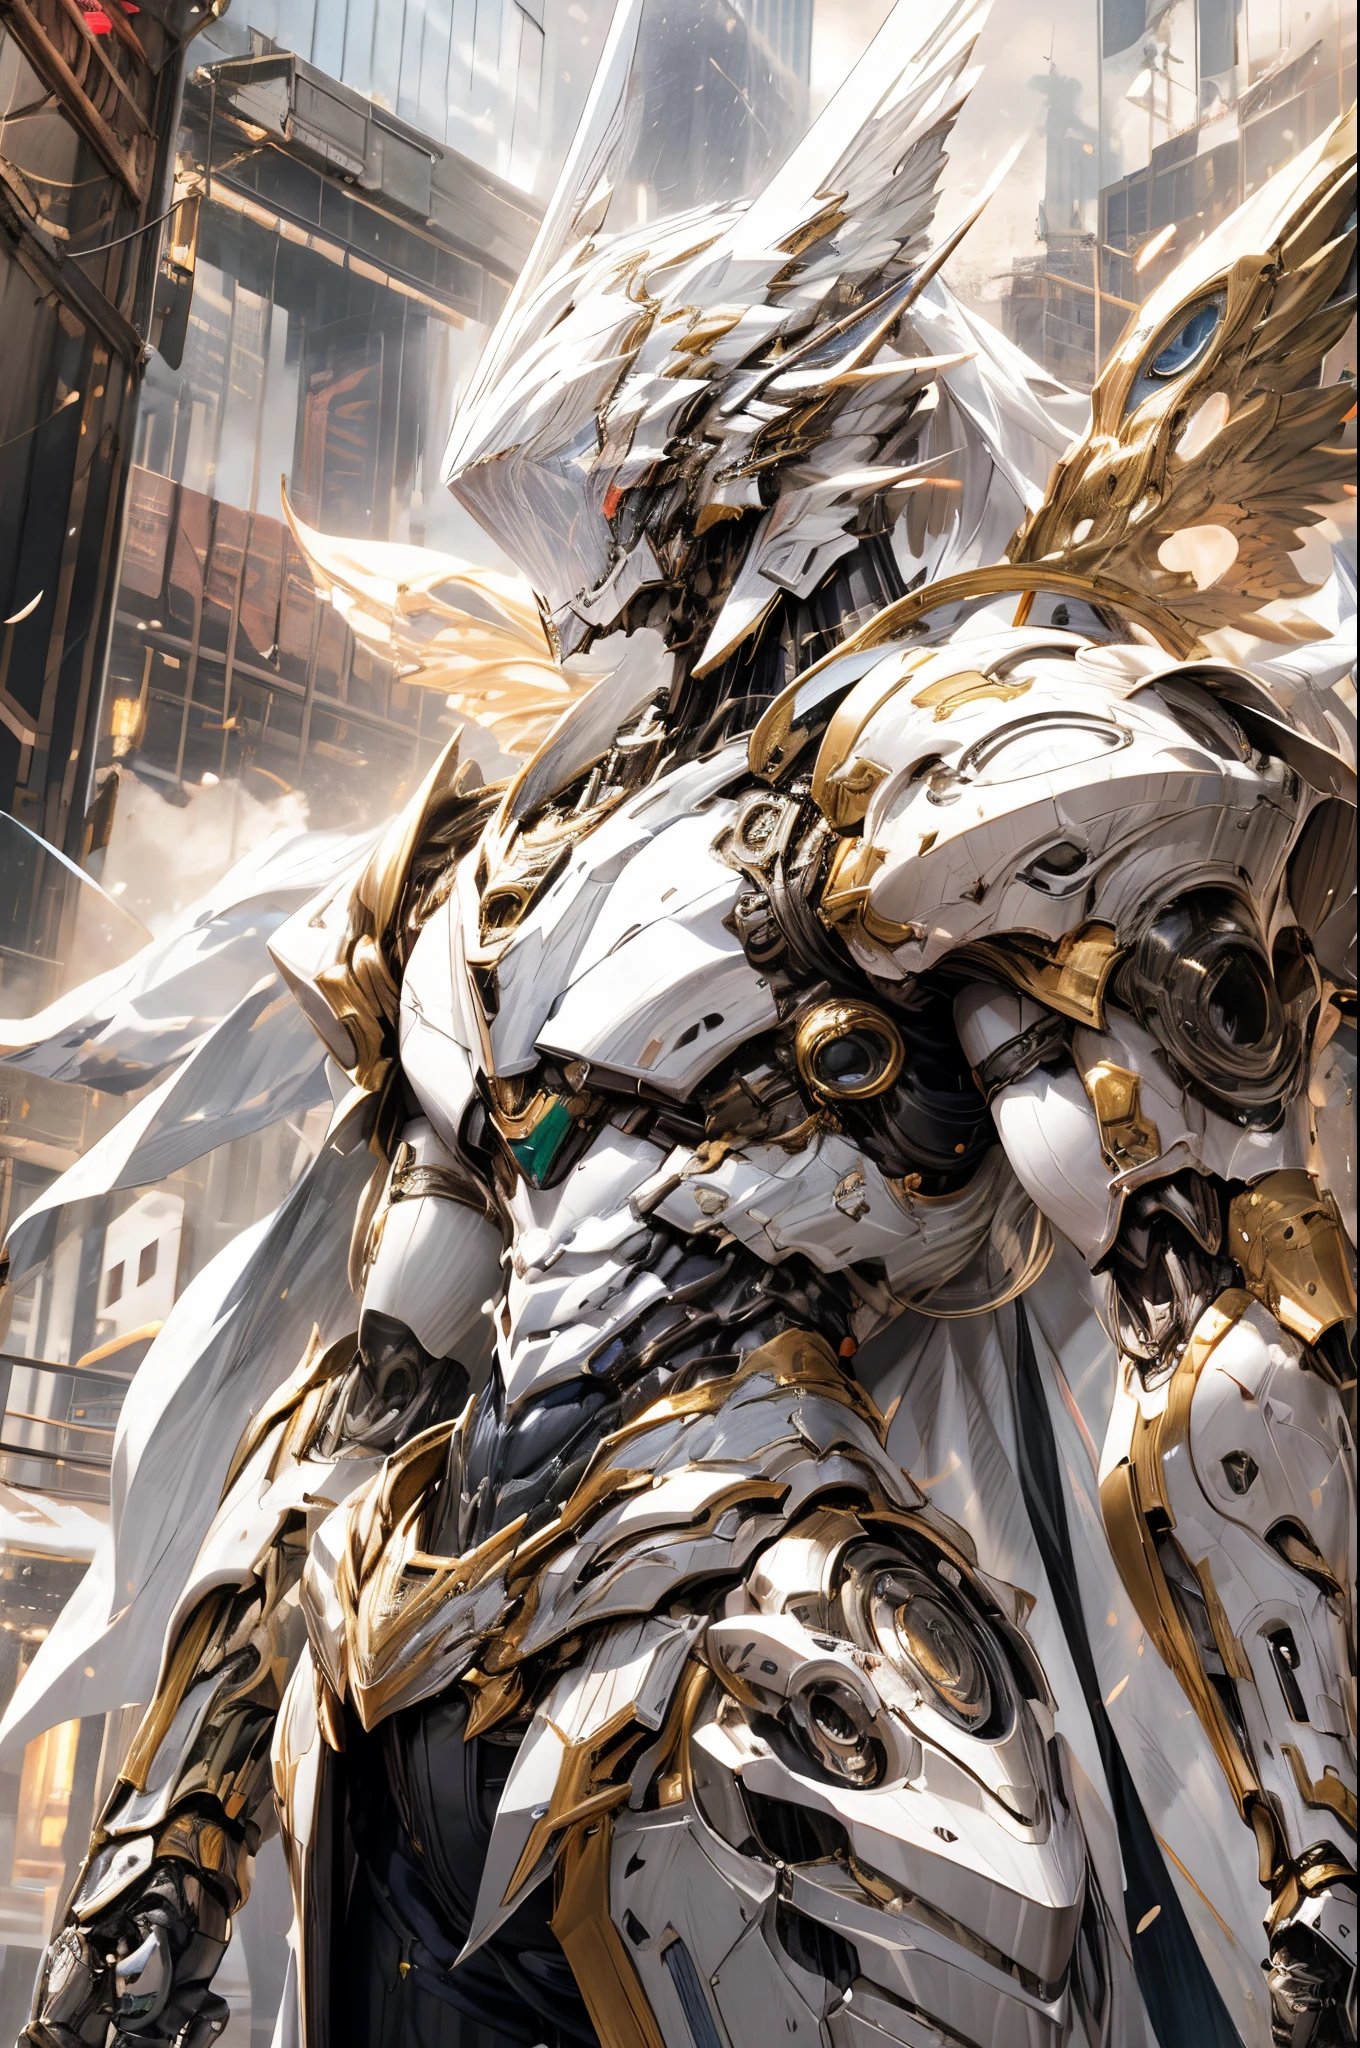 (((An epic and visually stunning digital anime masterpiece featuring a sylphlike masculine male space angel clad in a sleek yet tactical white armored military trench coat:1.2))), (((flat masculine male chest:1.5, mechanical mecha knight head:1.5))), (((the character is adorned in a (scifi tactical armored open front trench coat with a built in exoskeleton, hood pulled up) (over a form fitted armor plated yet super sleek and revealing under suit with waist cut outs), the armor plating on the upper arms and shoulders beautifully engraved))):1.4. The image showcases the intricacies of the character’s armor and clothing, ((capturing their flamboyant essence and heavy mecha aesthetic:1.2)). The character also possesses an androgynous charm, (((with slim yet heavily muscled physique:1.2, sylphlike with a sleek waist, toned yet beautifully sleek cybernetic arms:1.3, mechanical arms and legs:1.3, mecha muscles:1.3))), looking at viewer